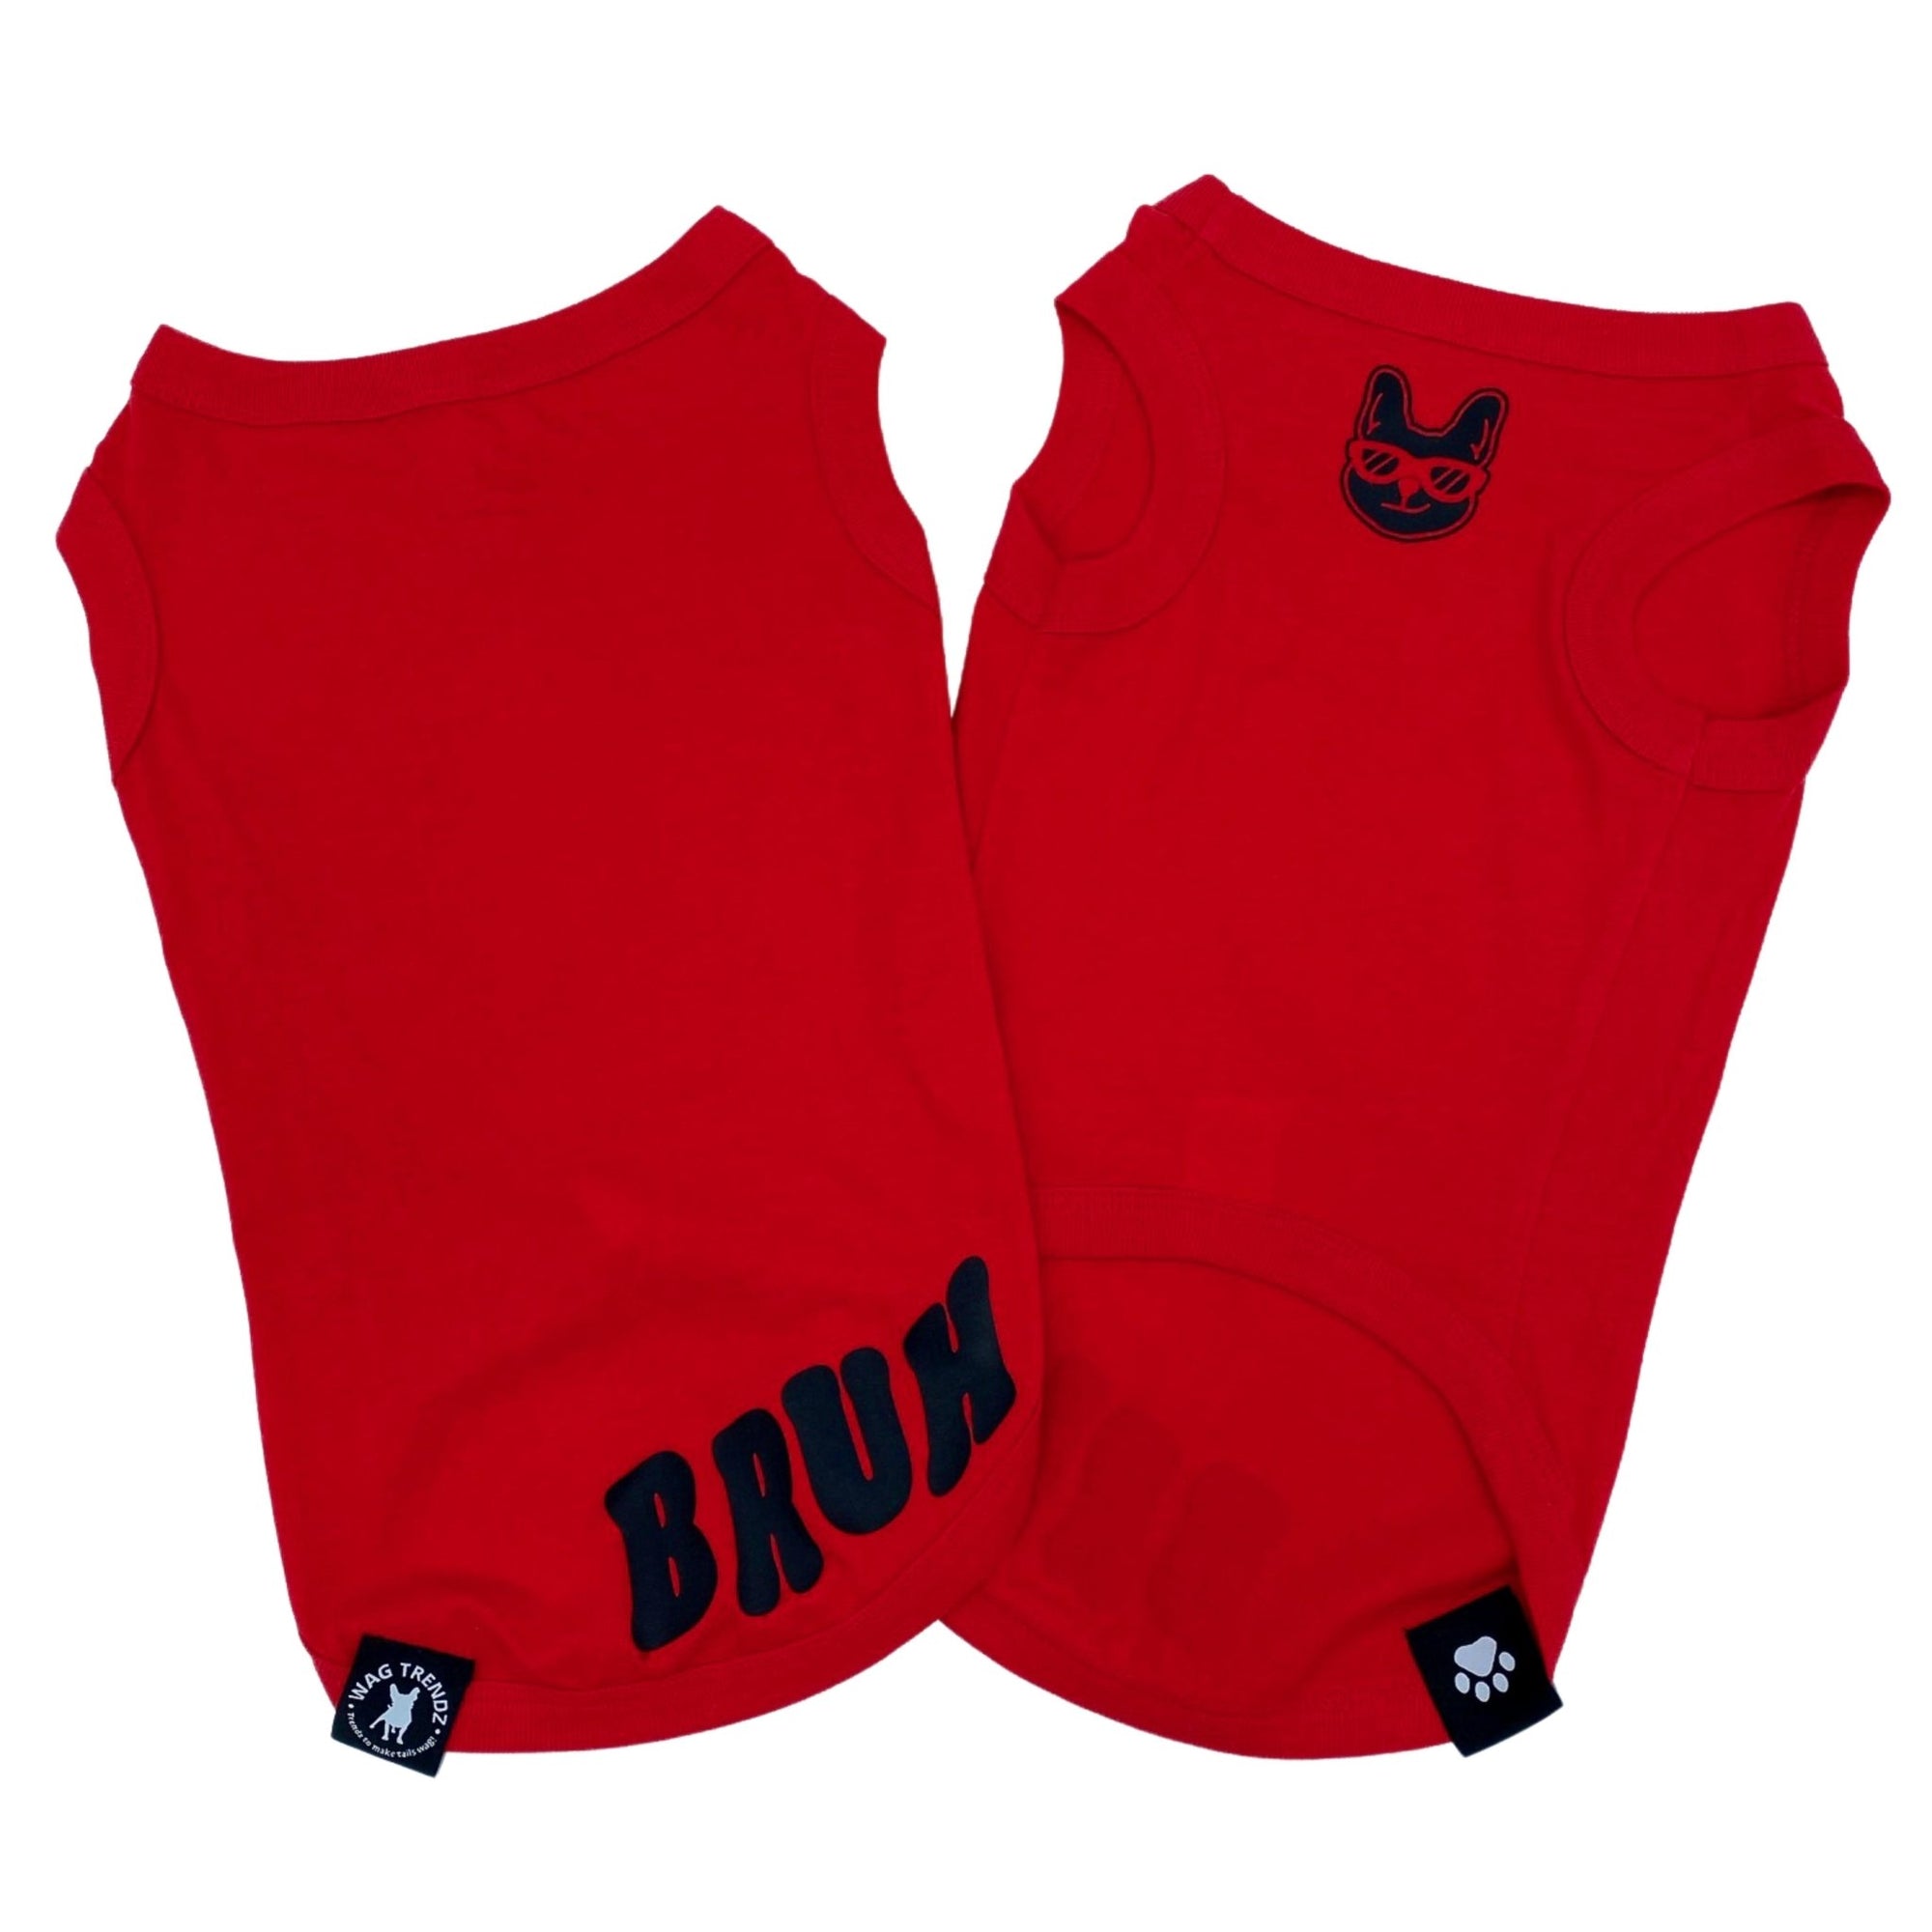 Dog T-Shirt - "Bruh" dog t-shirt in Red set - back view with BRUH spelled in black on red t-shirt and a smirk faced French Bulldog emoji on chest - against solid white background - Wag Trendz